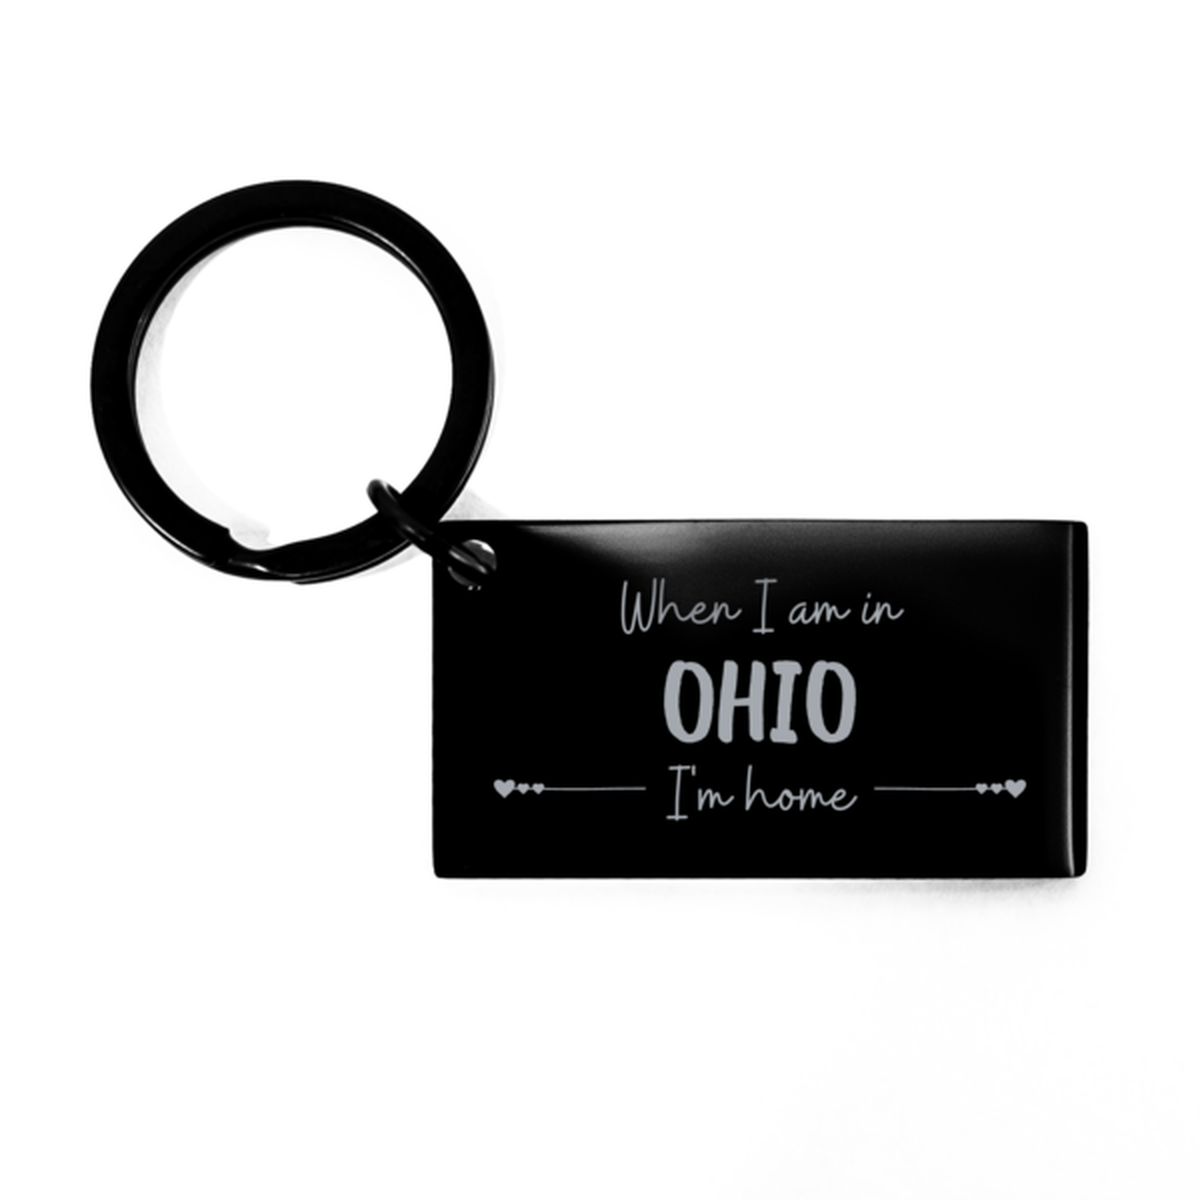 When I am in Ohio I'm home Keychain, Cheap Gifts For Ohio, State Ohio Birthday Gifts for Friends Coworker